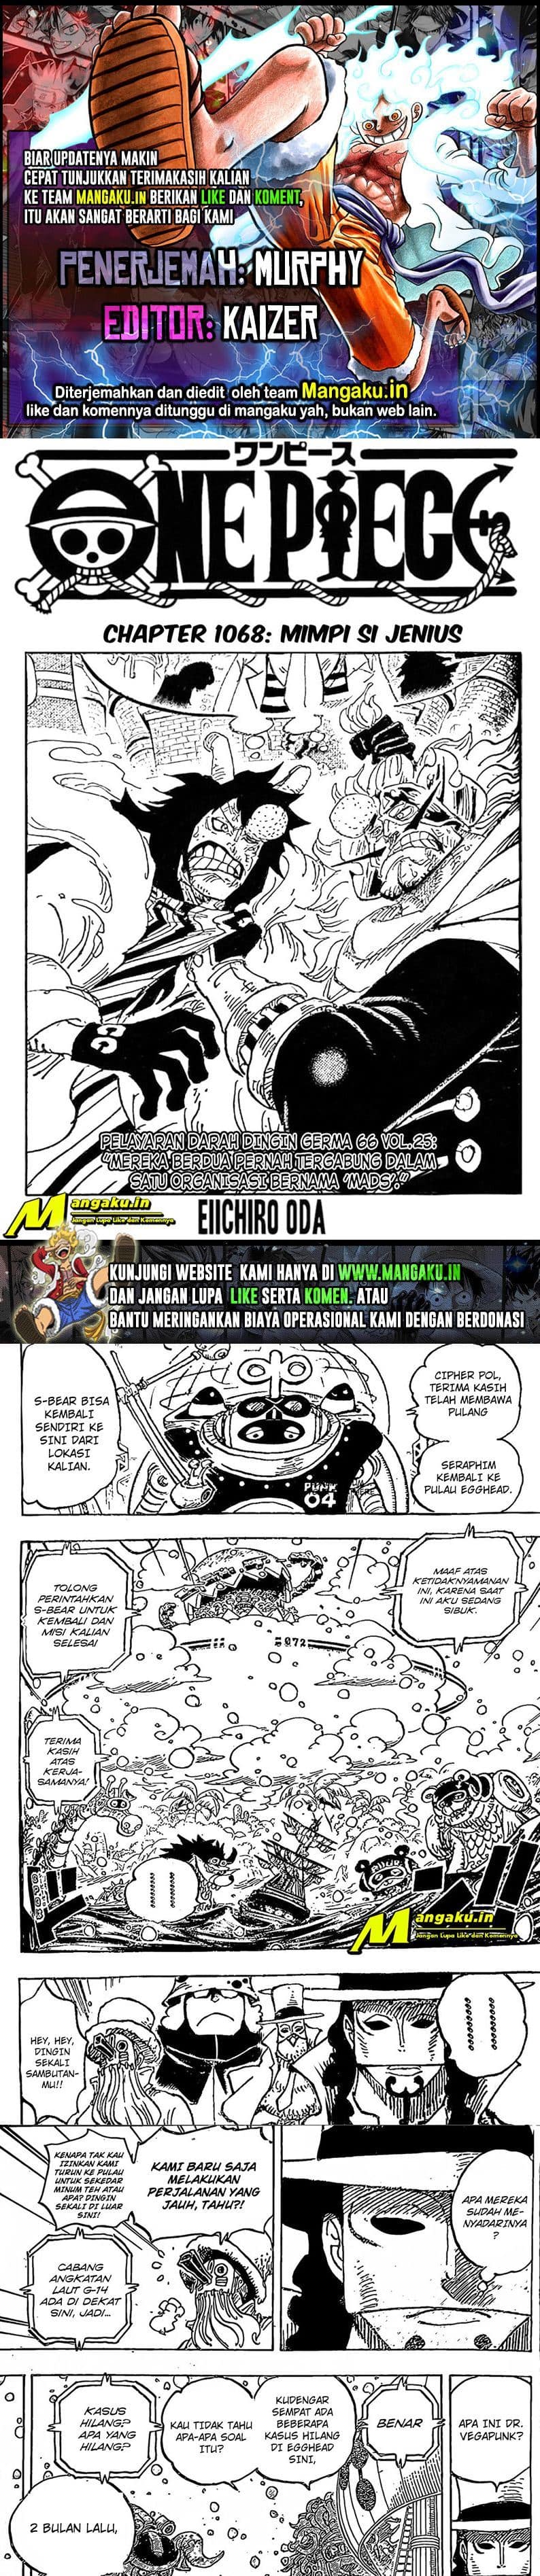 One Piece: Chapter 1068 - Page 1